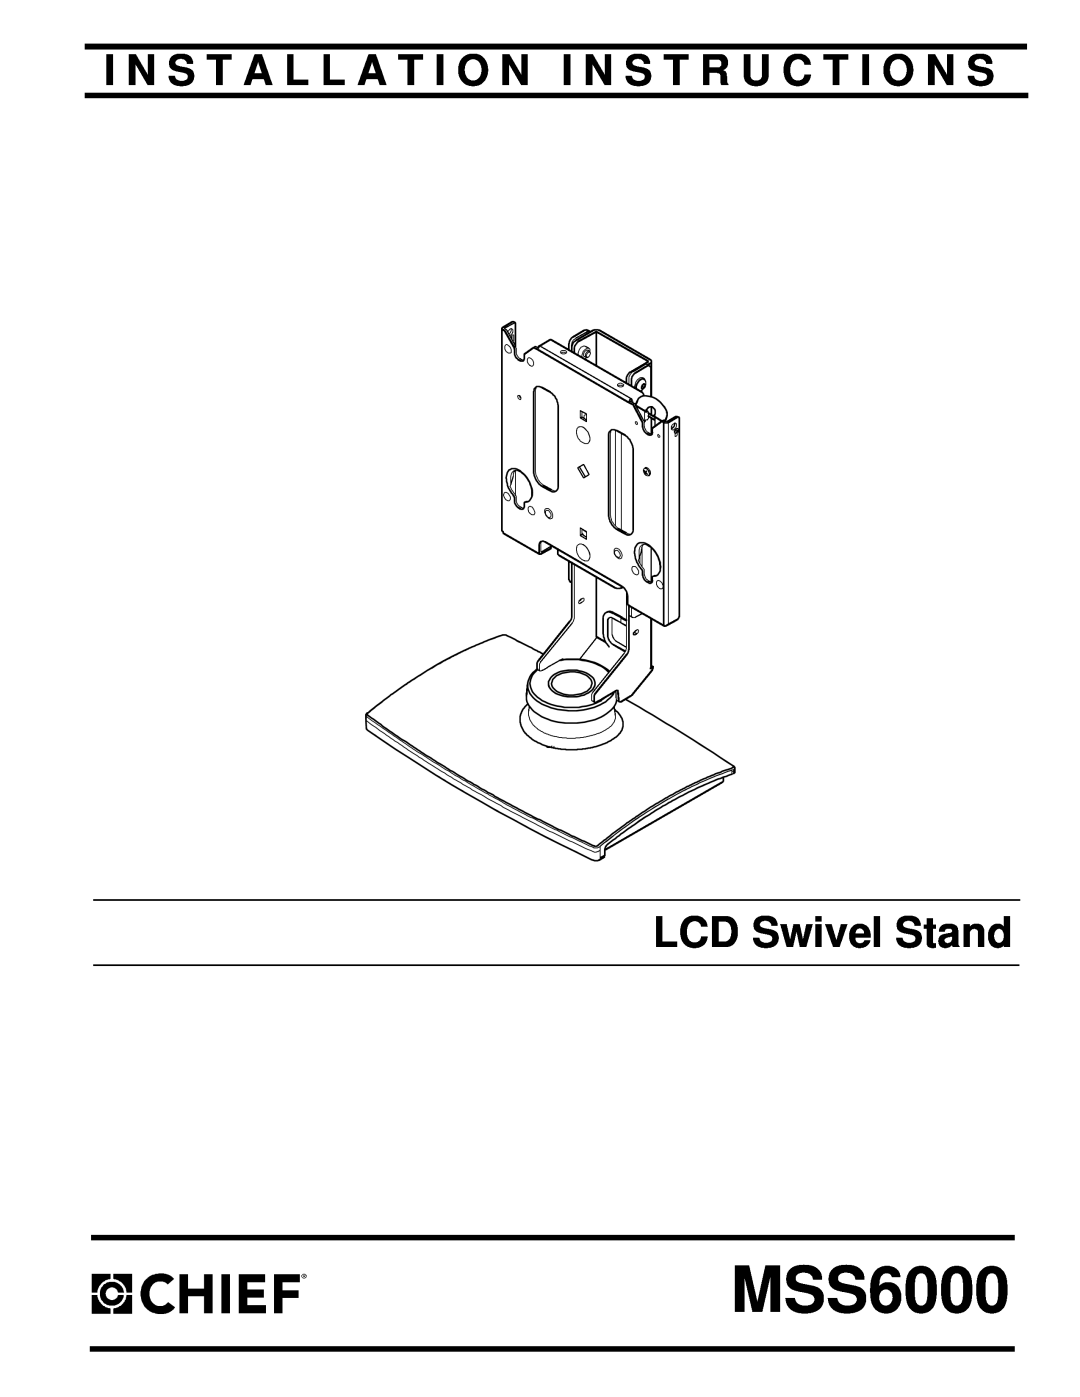 Chief Manufacturing MSS6000 installation instructions I N S T A L L A T I O N I N S T R U C T I O N S, LCD Swivel Stand 